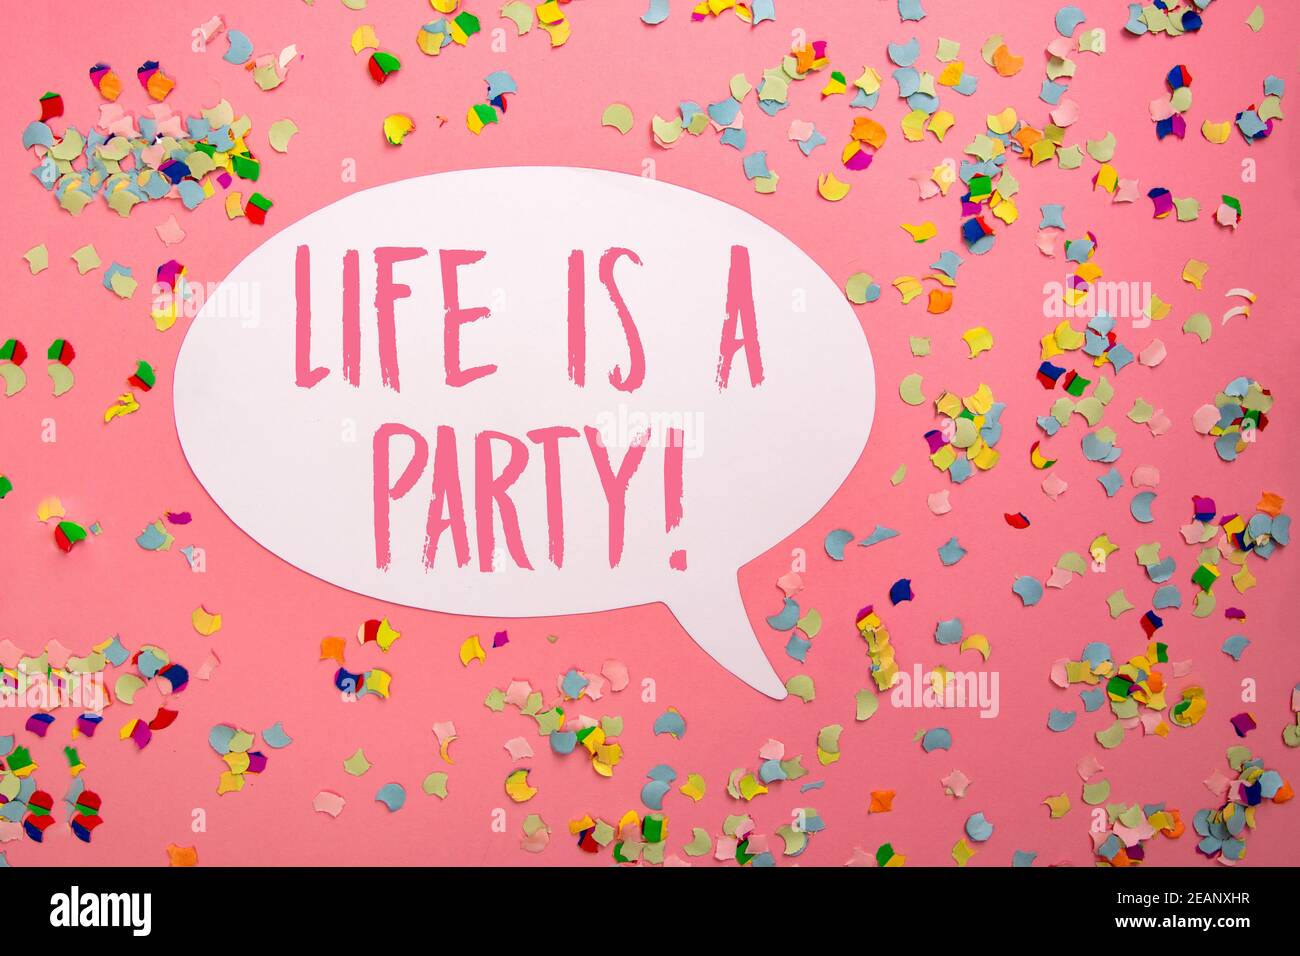 Life is a party Stock Photo